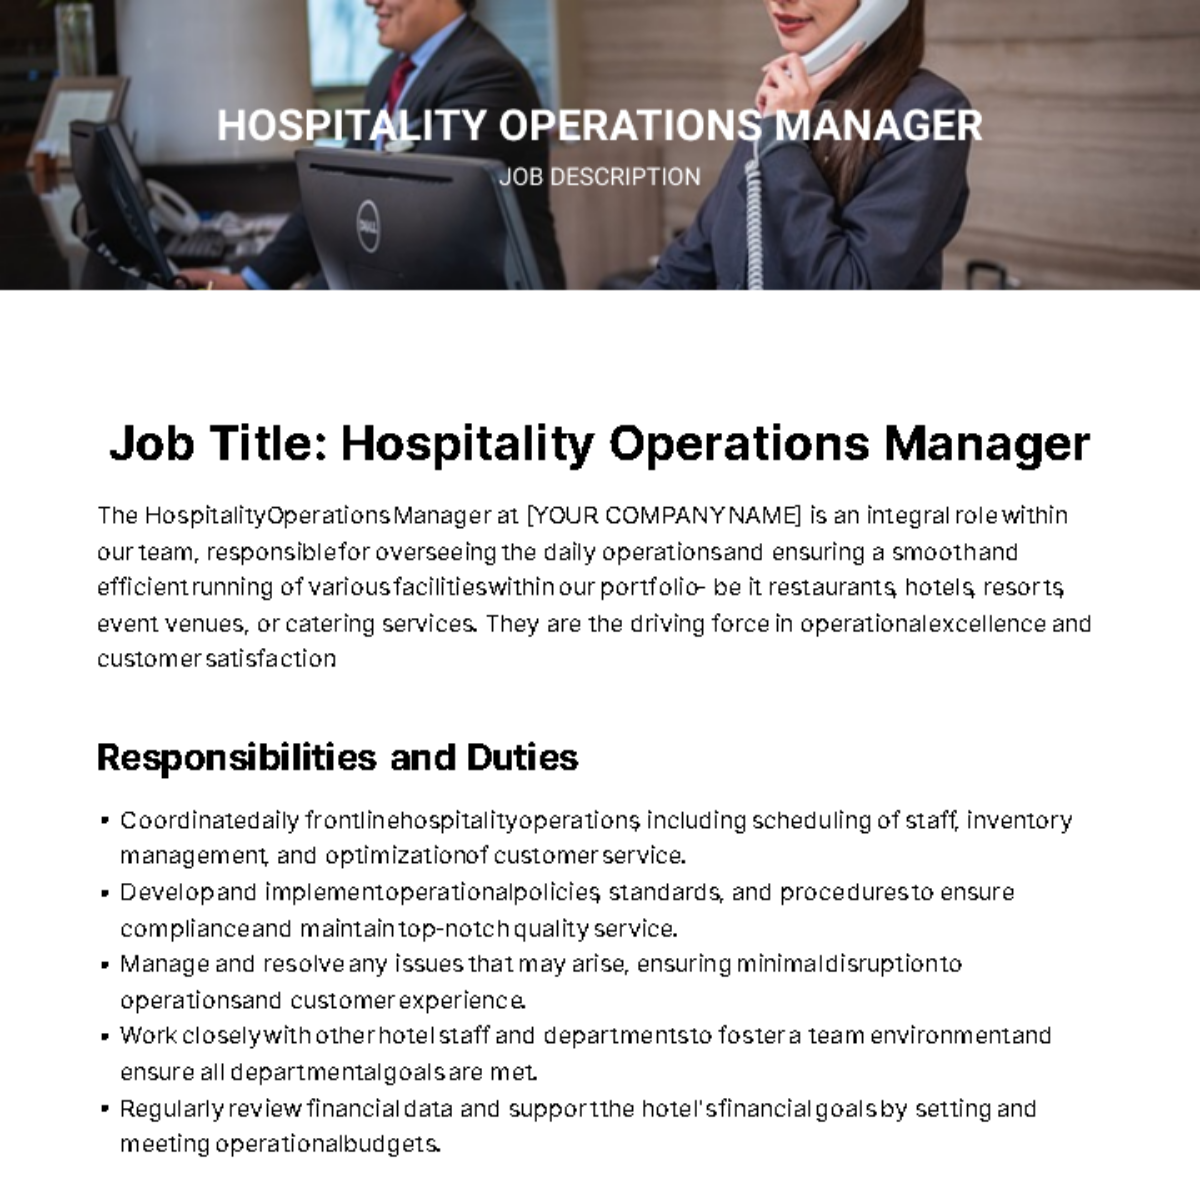 Hospitality Operations Manager Job Description Template